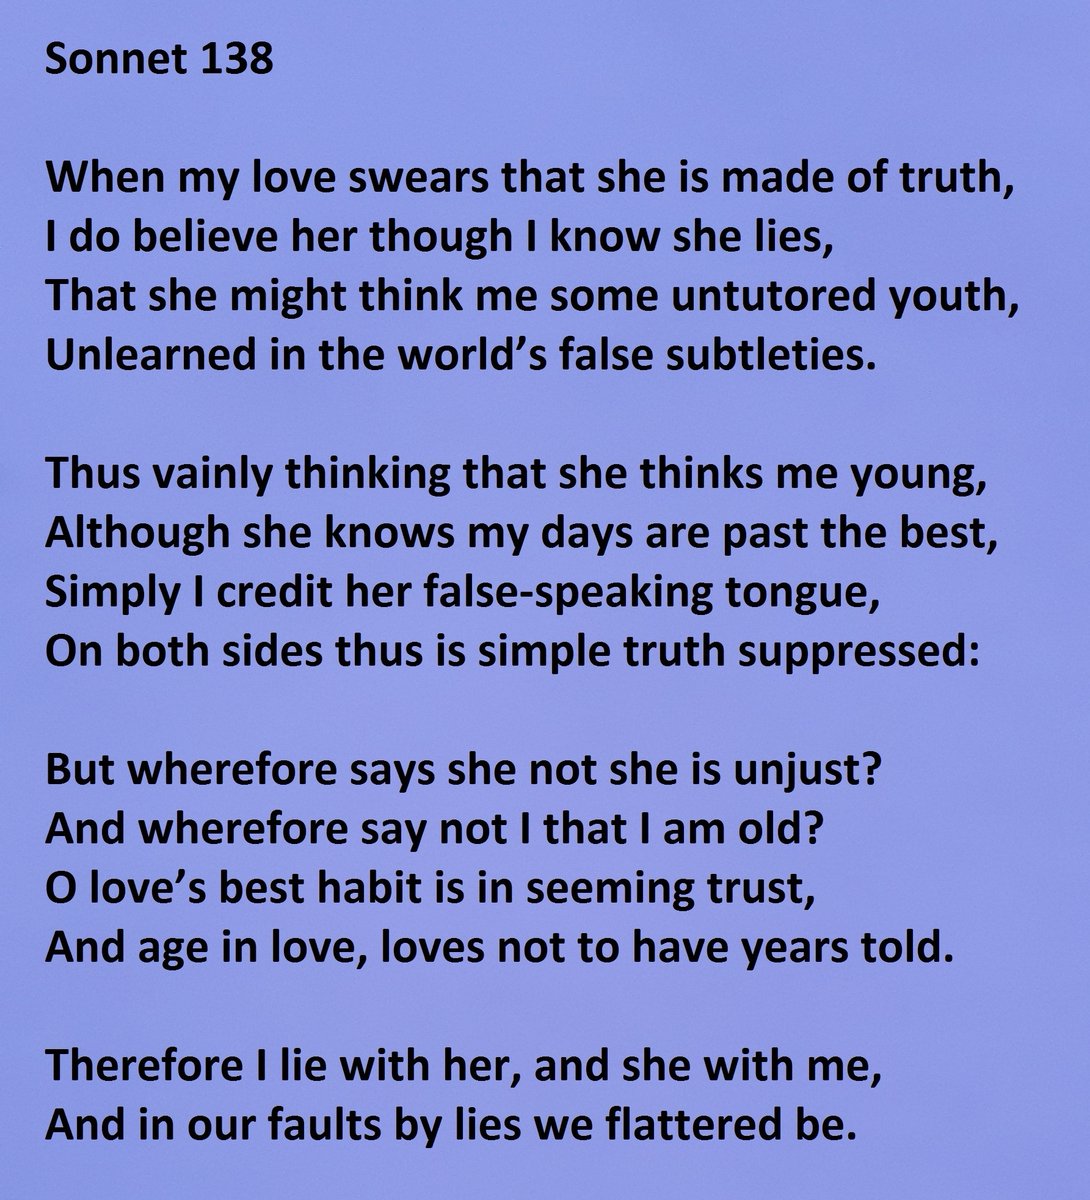 Sonnet 138 by William Shakespeare "When my love swears that she is made of truth"